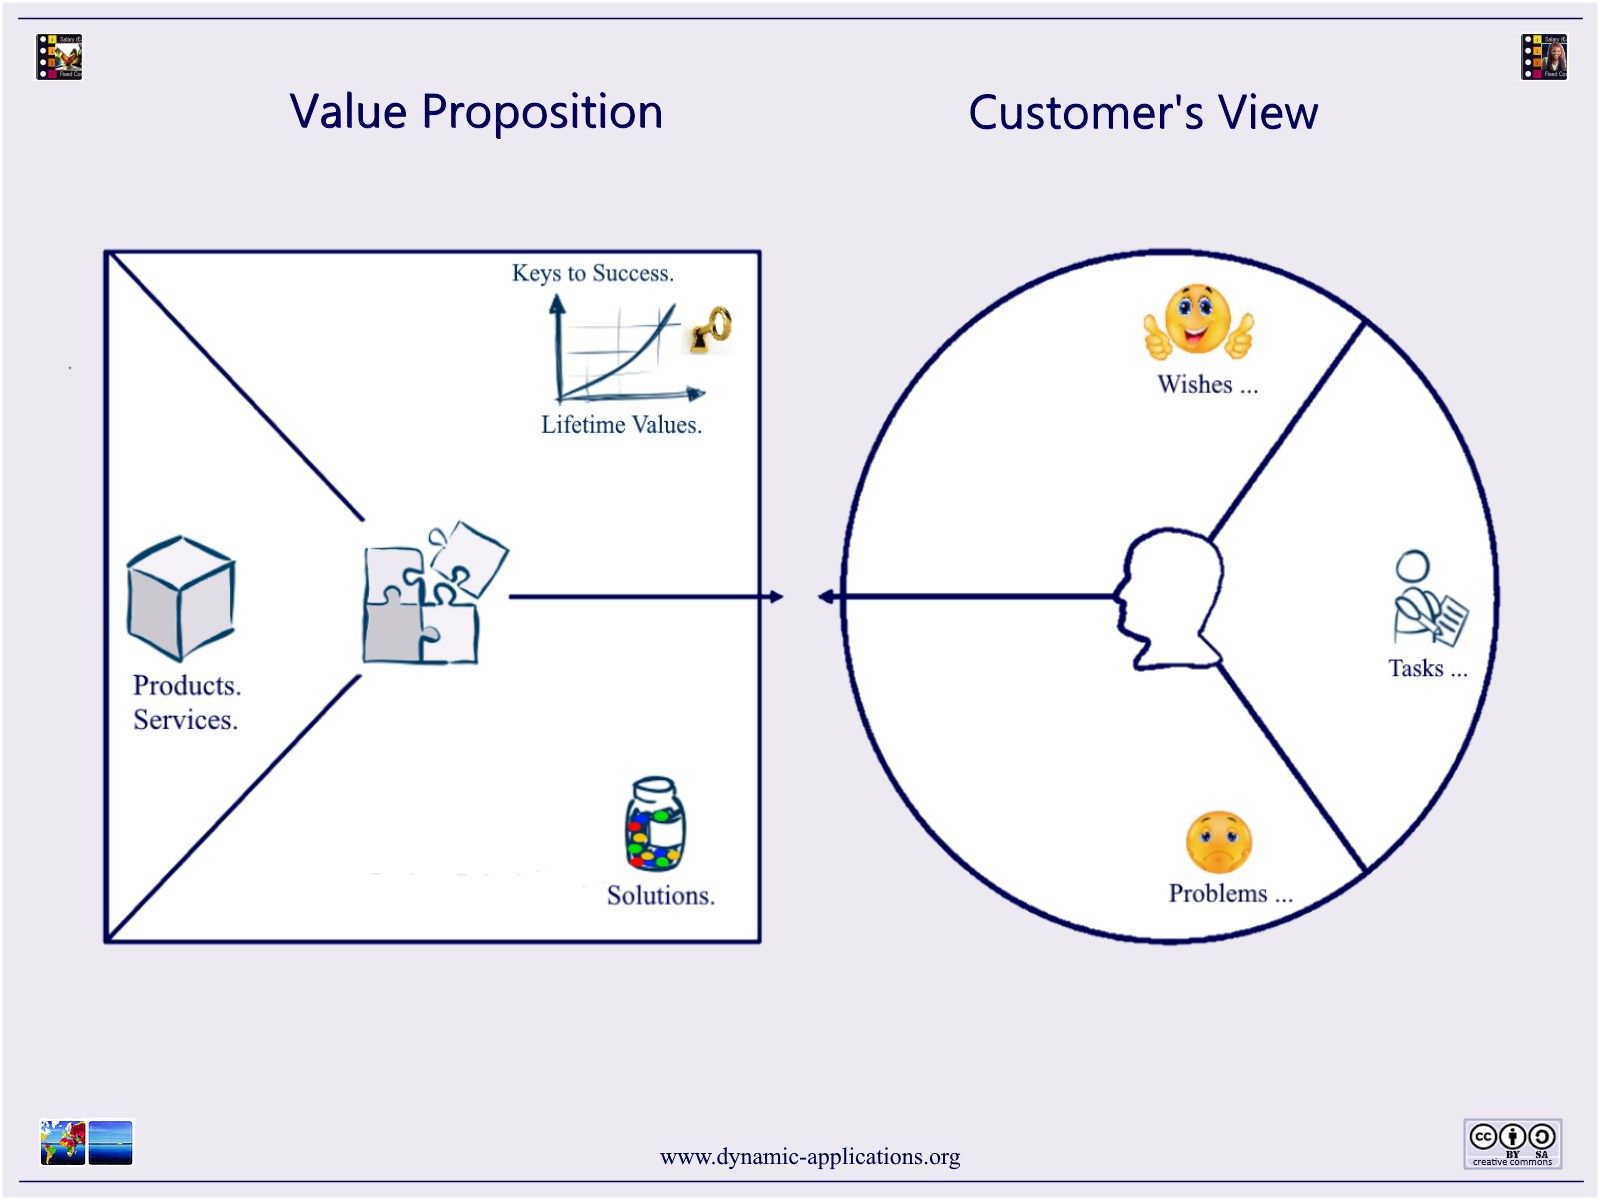 Value Proposition - calculate your offering in Lifetime Value ($€& / h).